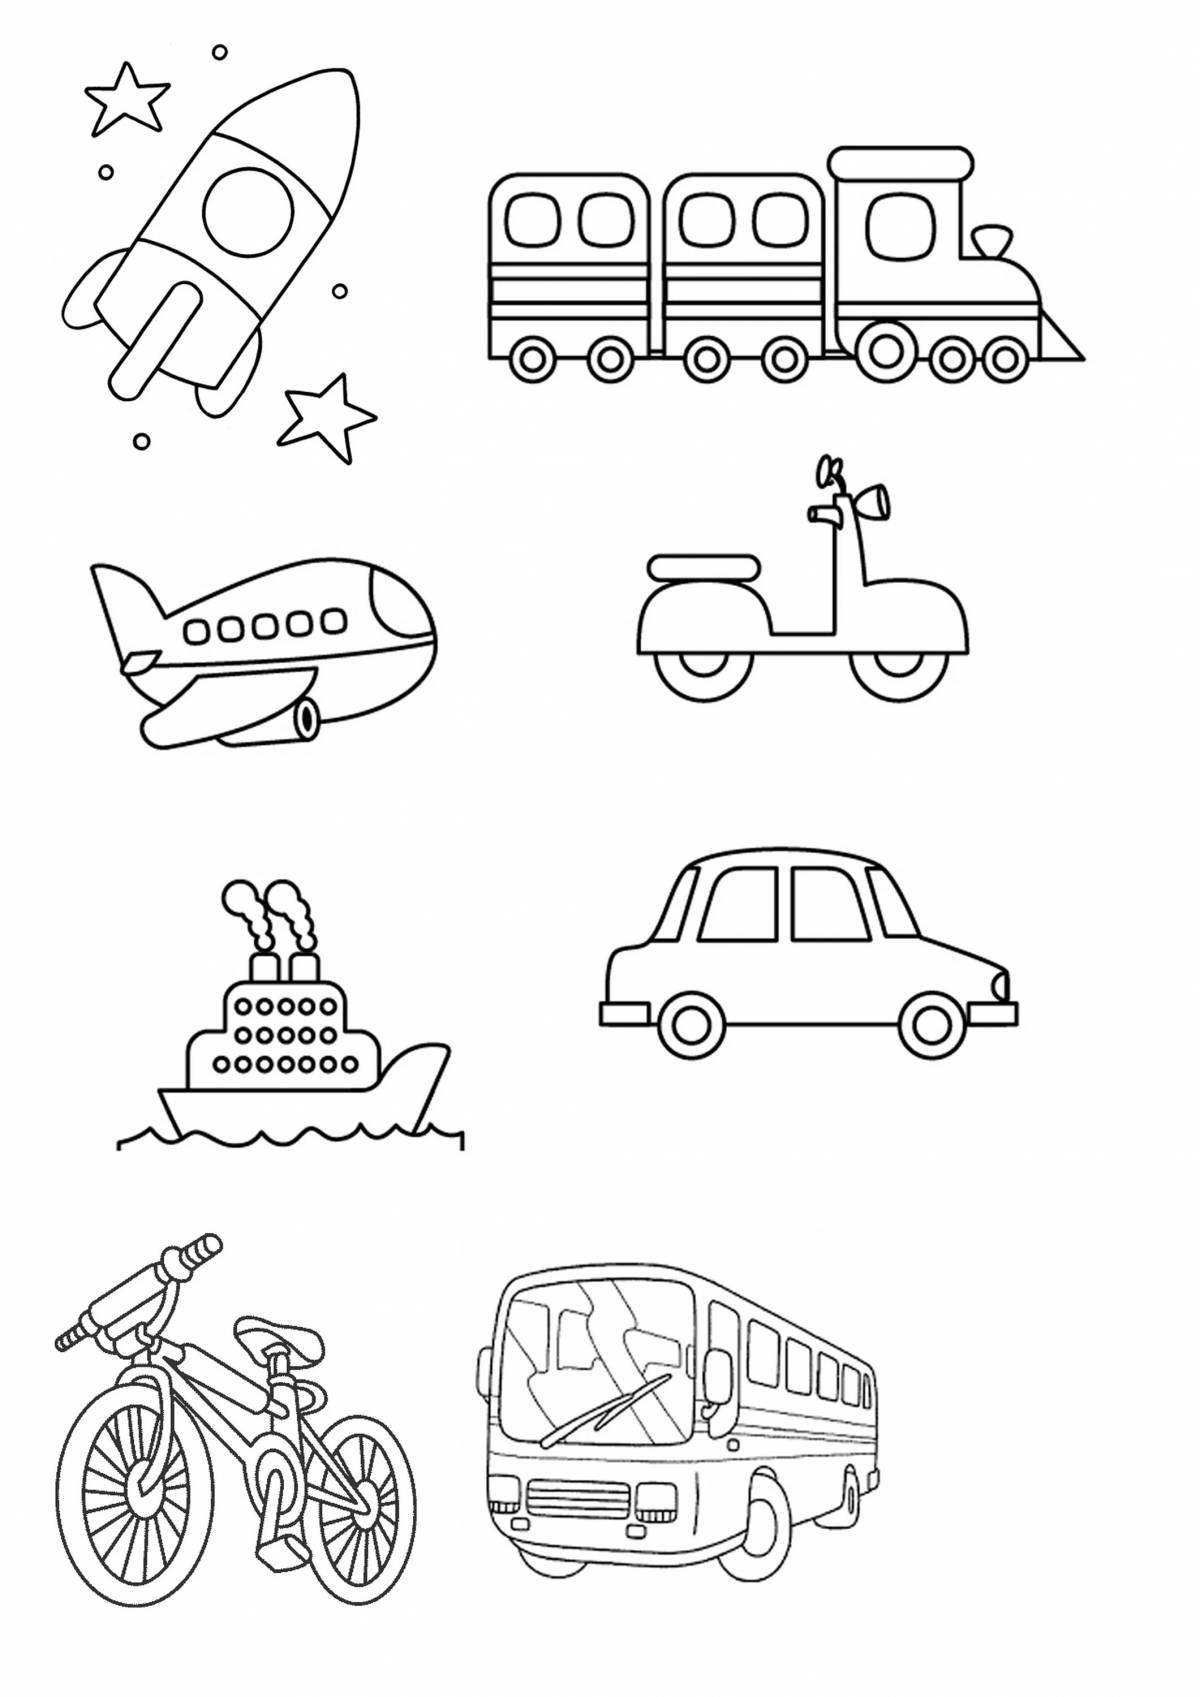 Fun transport coloring book for kids 6-7 years old